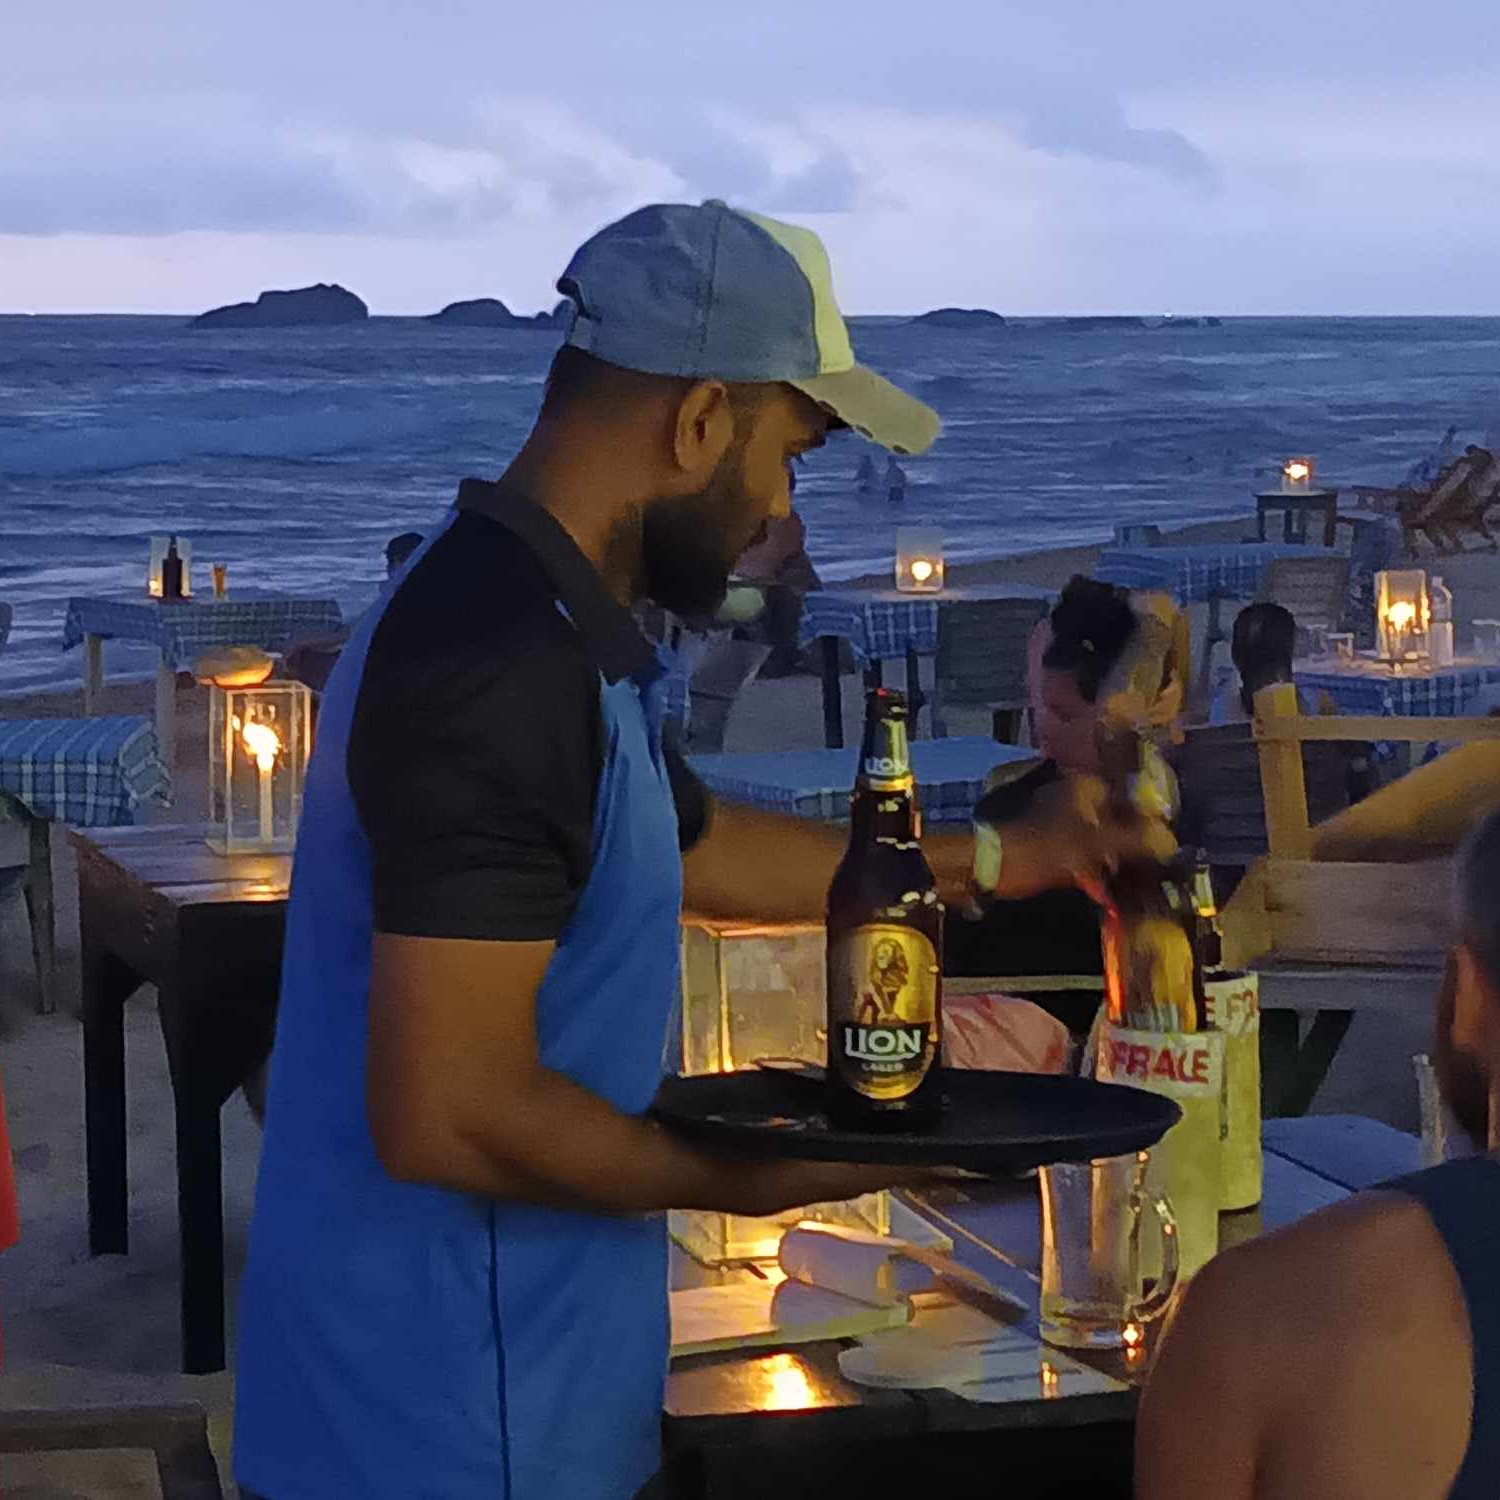 A close-up picture of a person serving beer in a beach bar at dusk. The sea in the background.